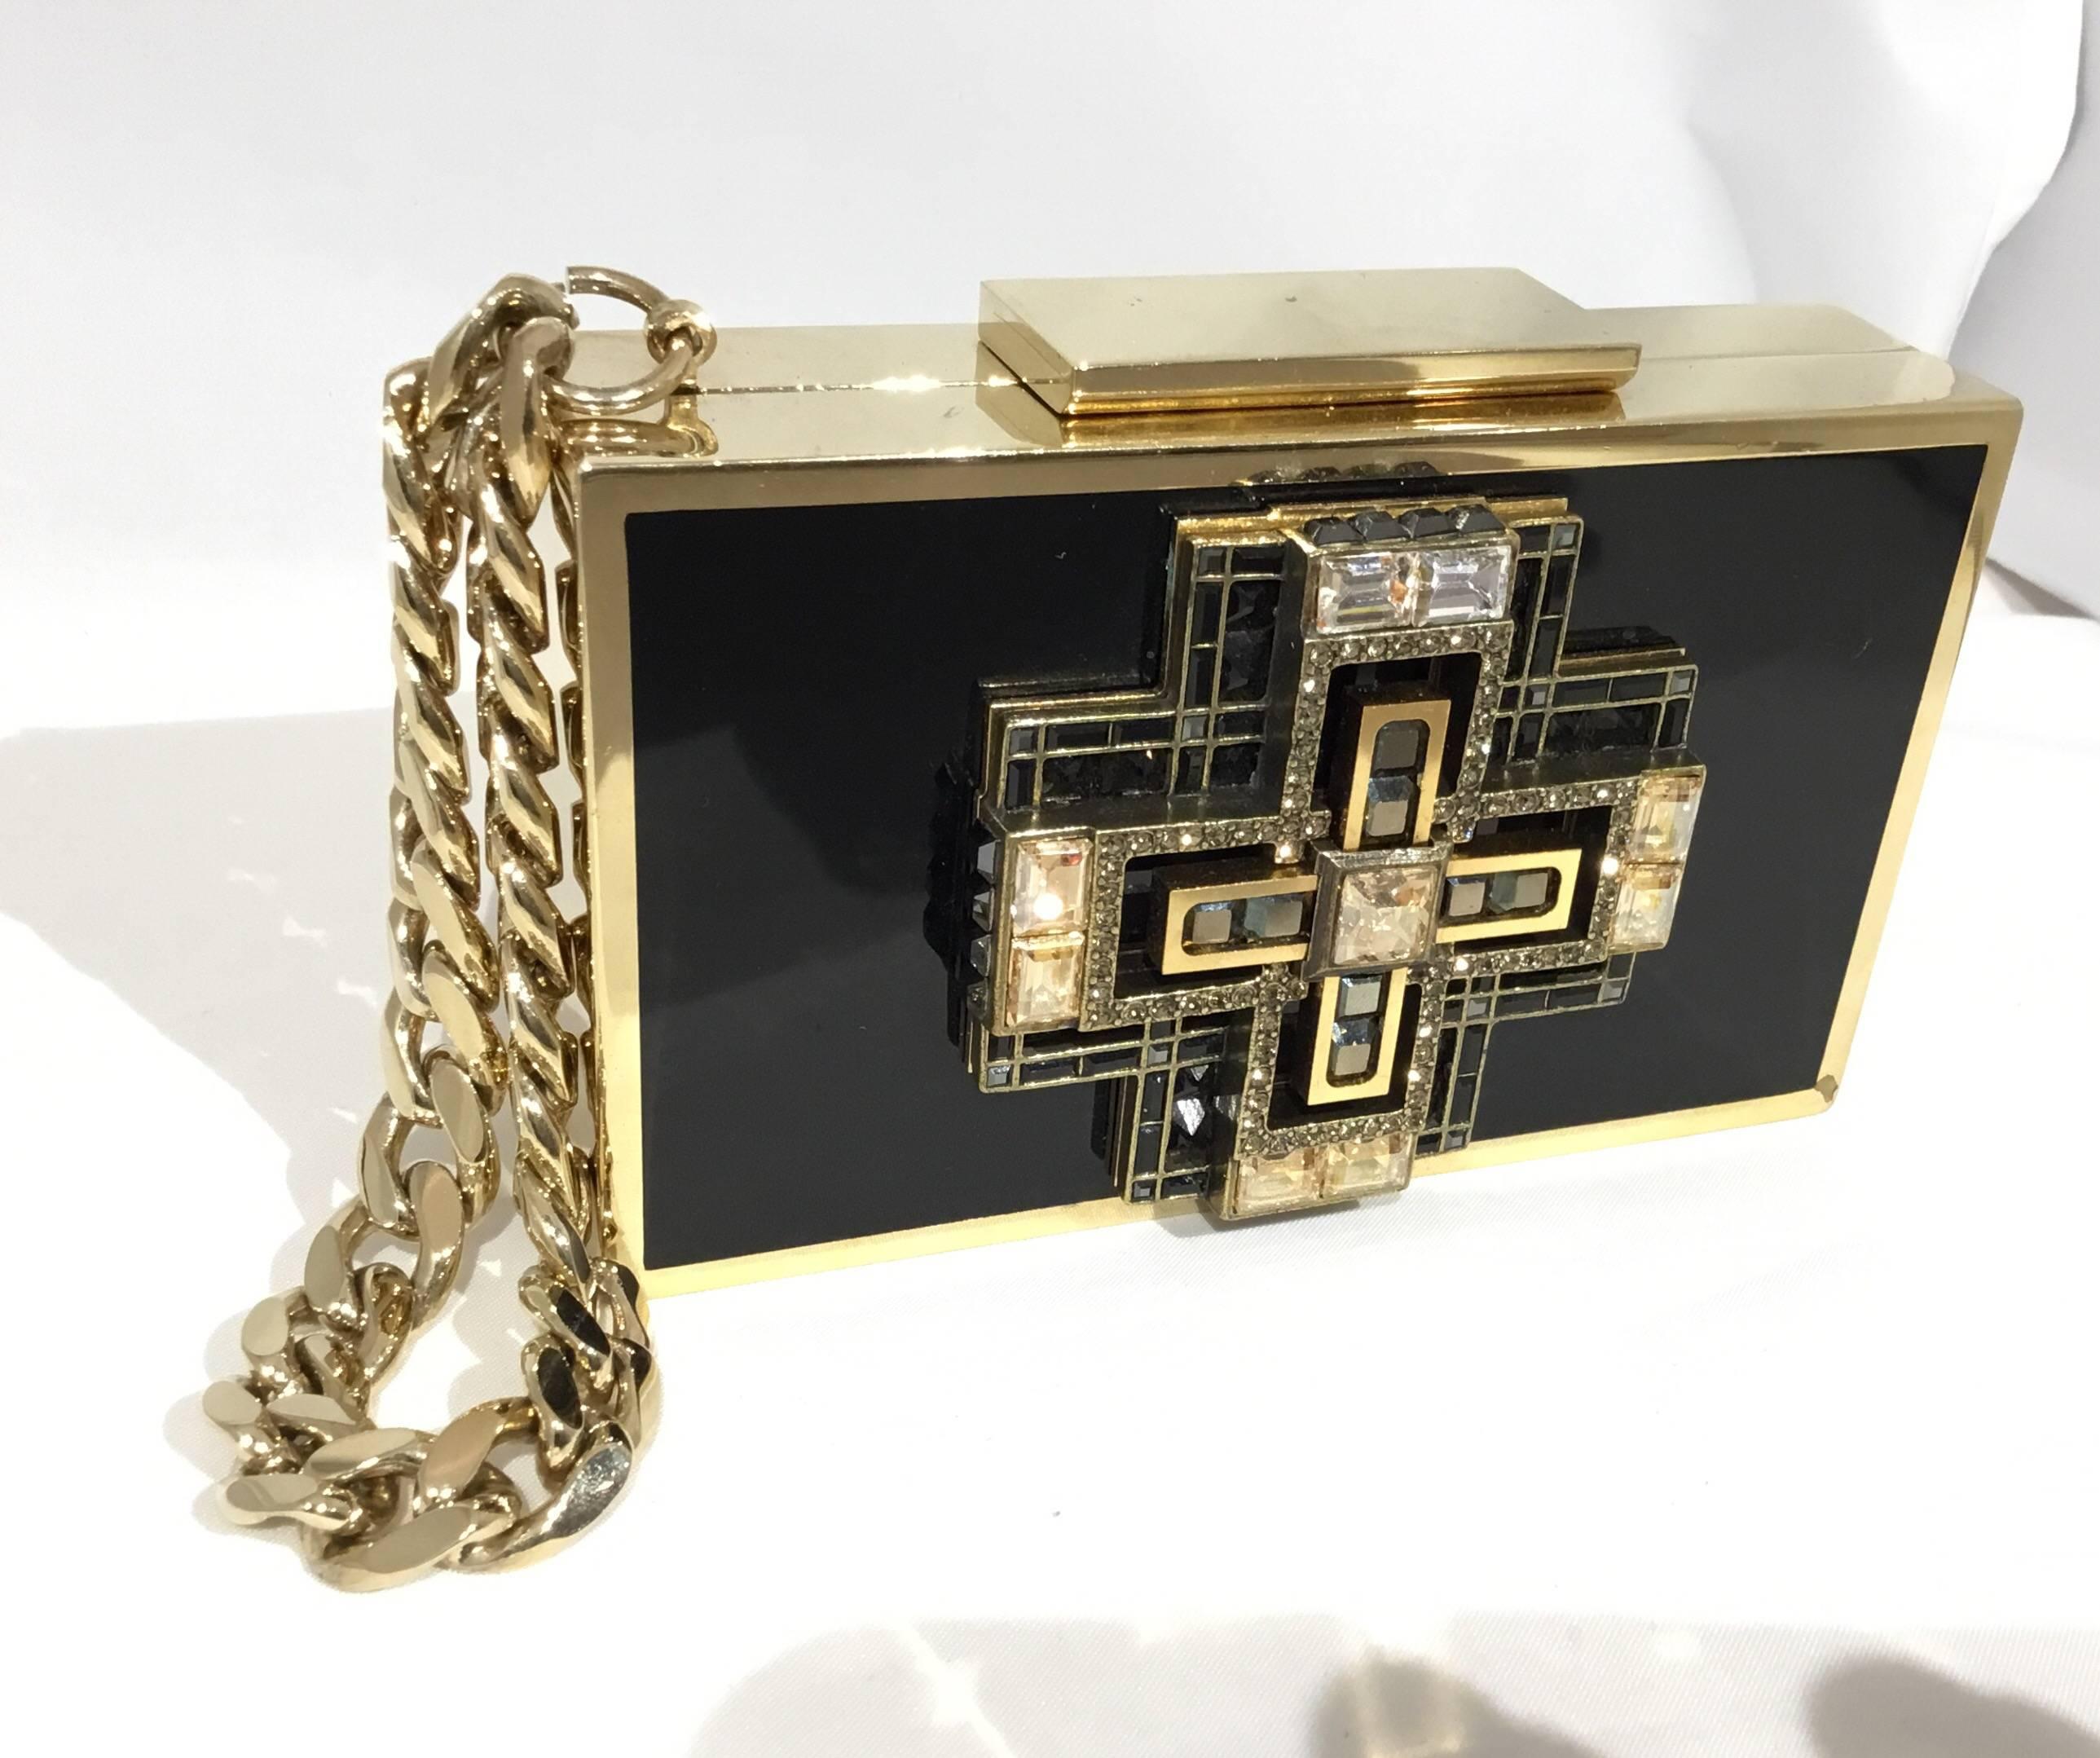 Lanvin evening clutch with crystal art deco design at the front, gold-tone Cuban link wrist handle. Clutch is fully lined in a brown velvet fabric. Light wears to the metal throughout from normal handling. Overall excellent condition.

Measurements: